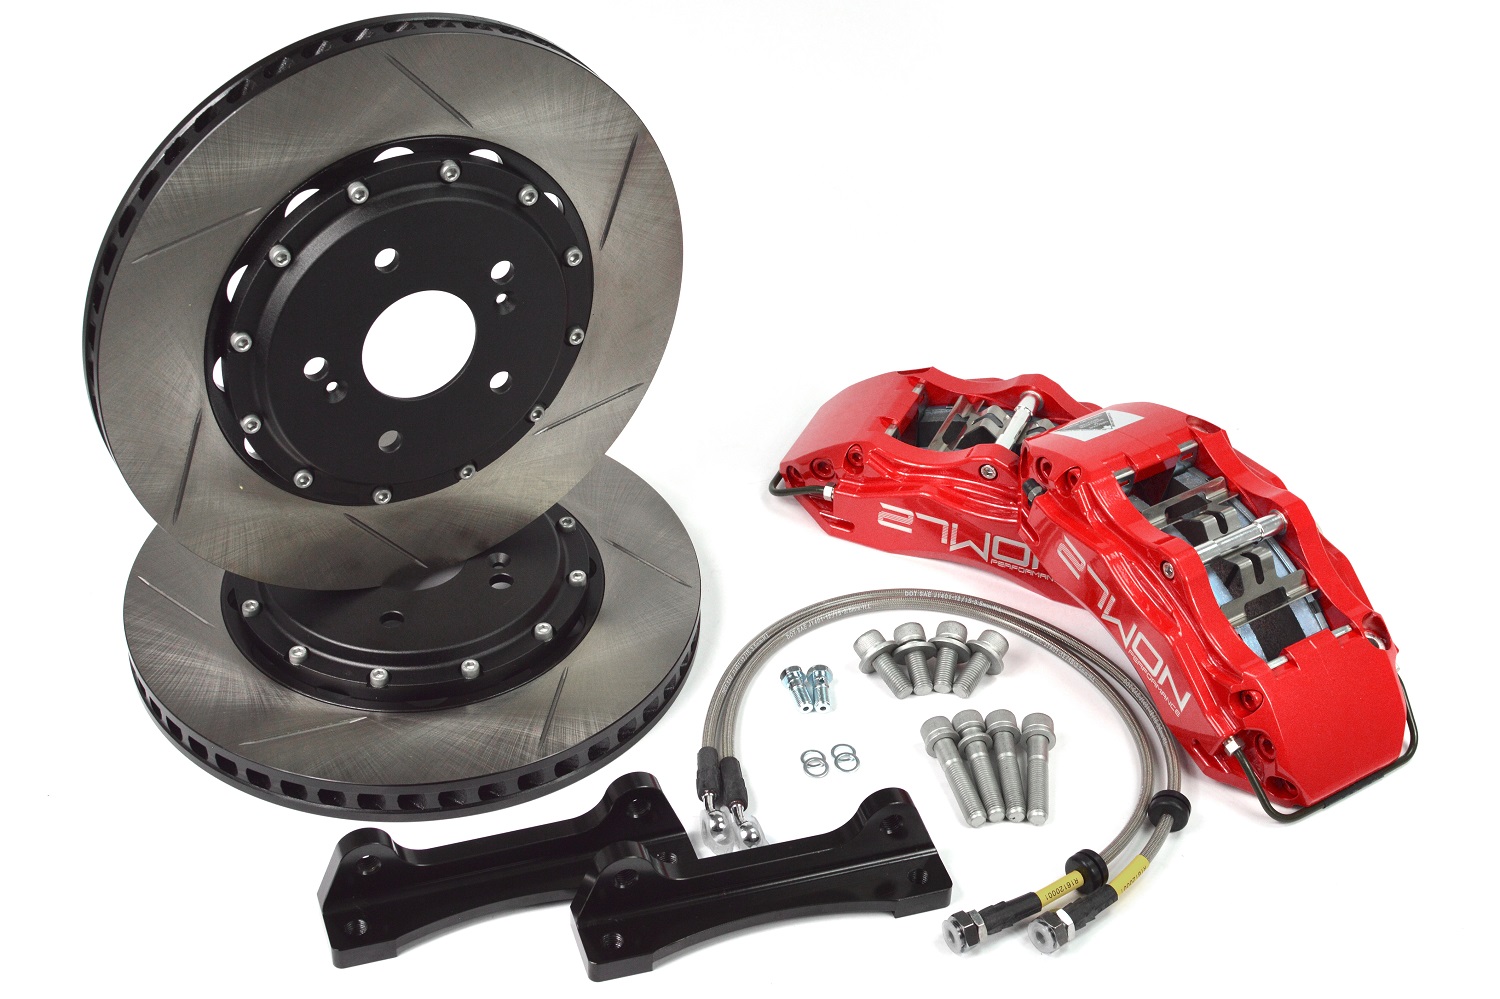 Front calipers, rotors, lines, and hardware make this a complete front Big Brake Kit for your AP1 & AP2 Honda S2000